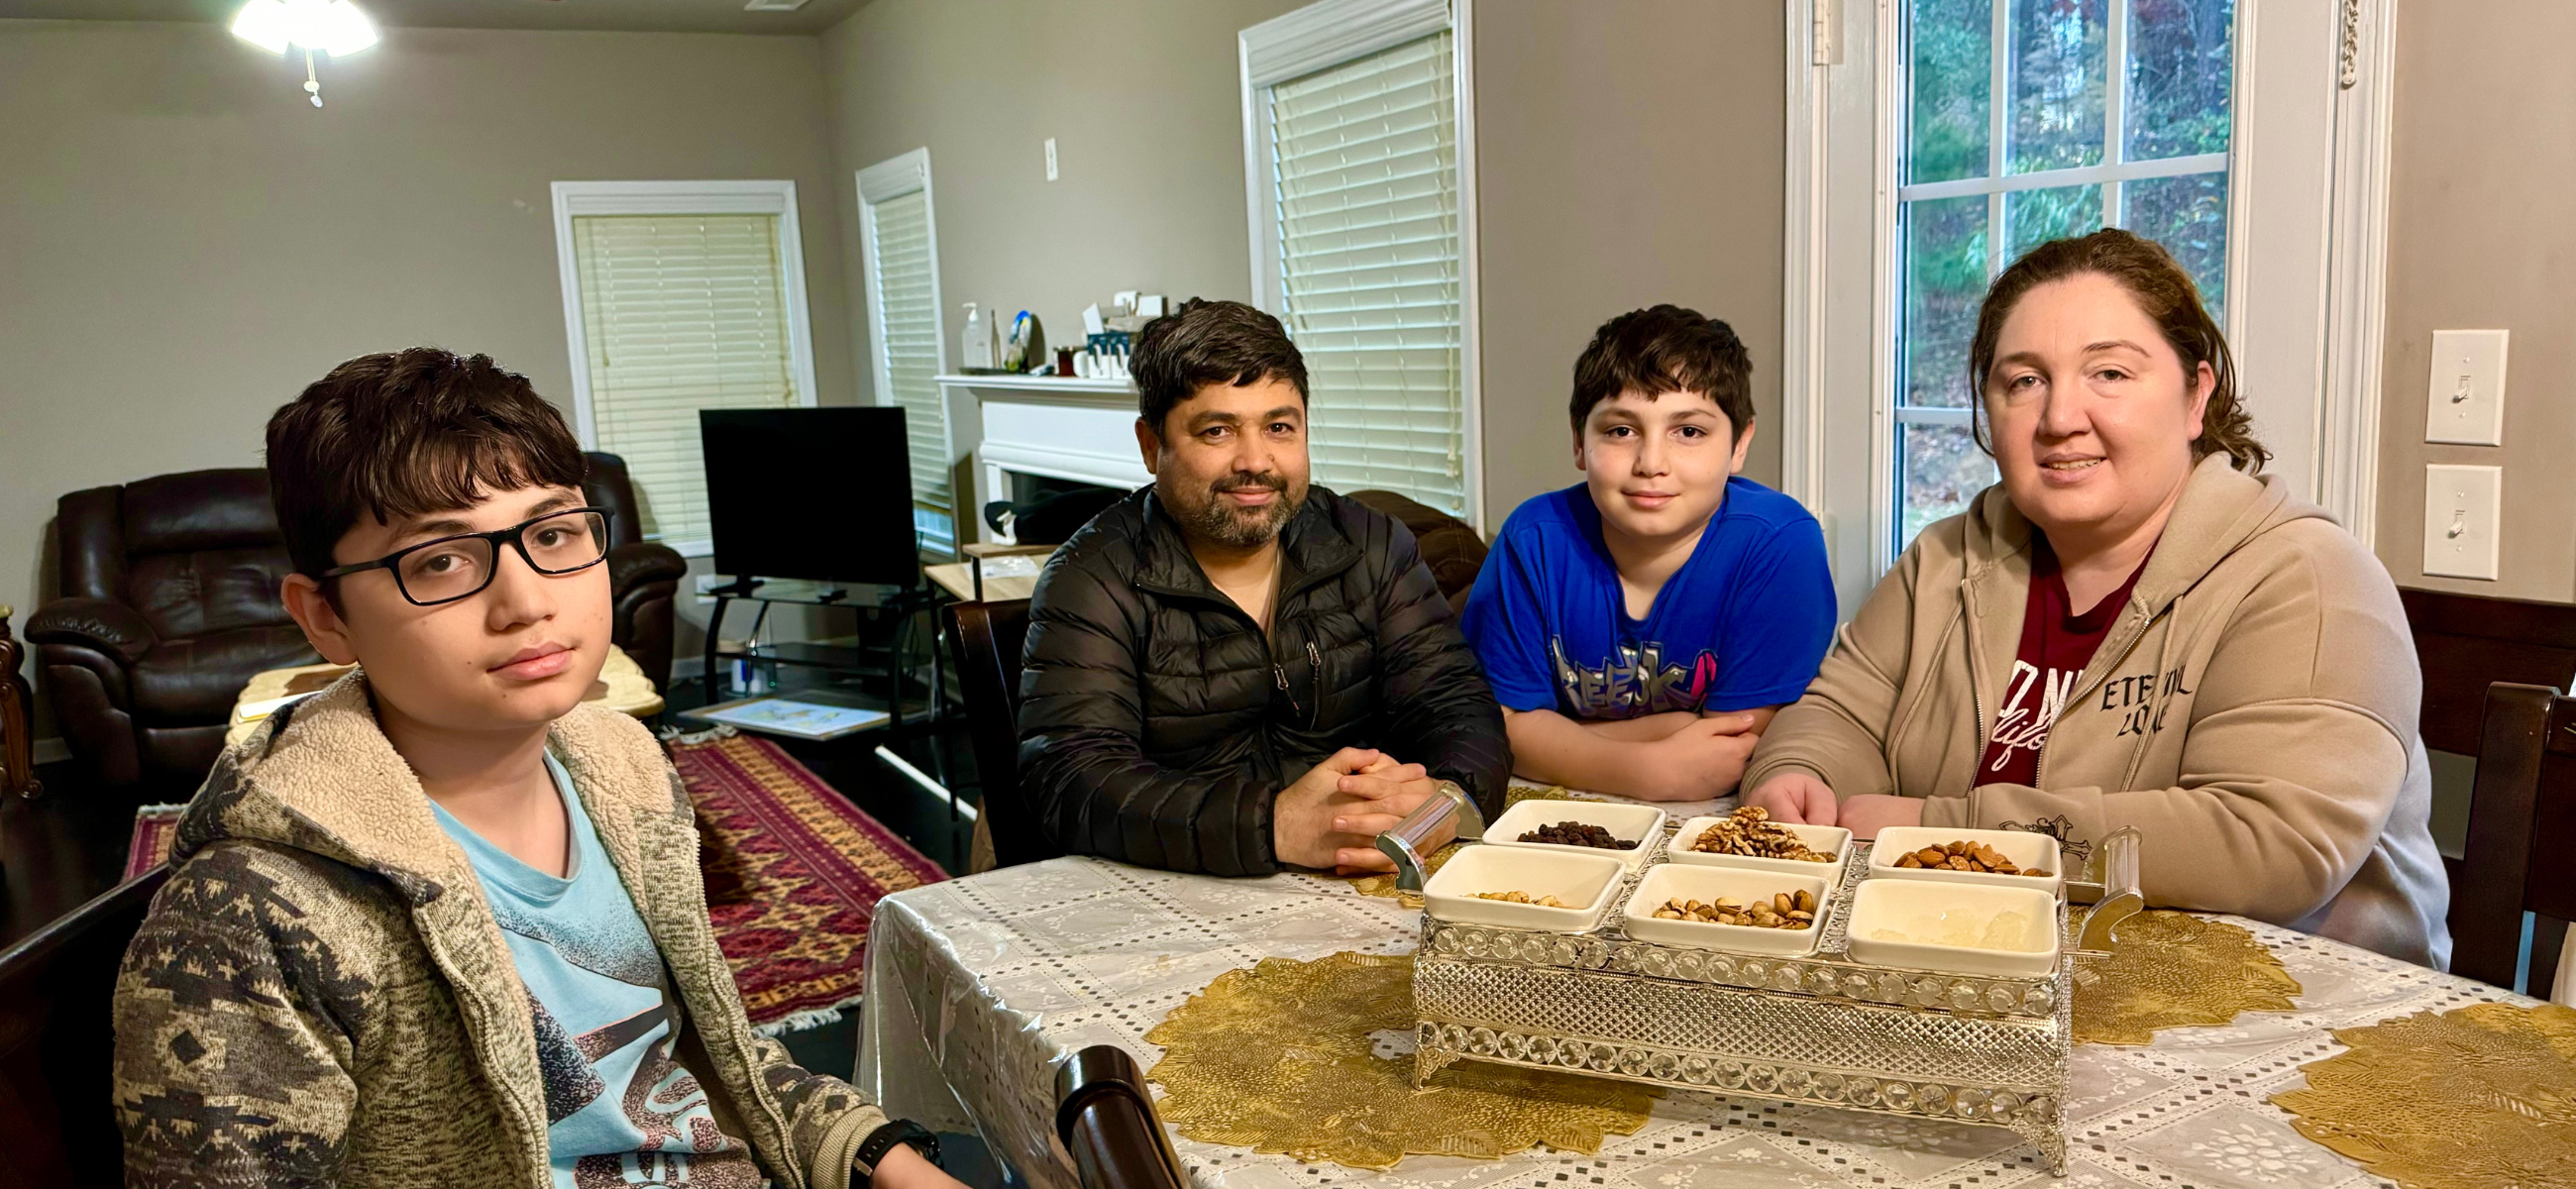 Farangais Saidi (right) and her husband Sayed Sajjad (center left) at their home in Snellville with their two sons, Harakhsh Sajjad (left) and Hoshang Sajjad (center right). Saidi, an OB/GYN doctor trained in Afghanistan, hopes to practice medicine in Georgia. Sajjad, an orthopedist, said the family can only afford for one of them to pursue medical licensing in Georgia at present. Both doctors are currently working as pharmacy technicians.